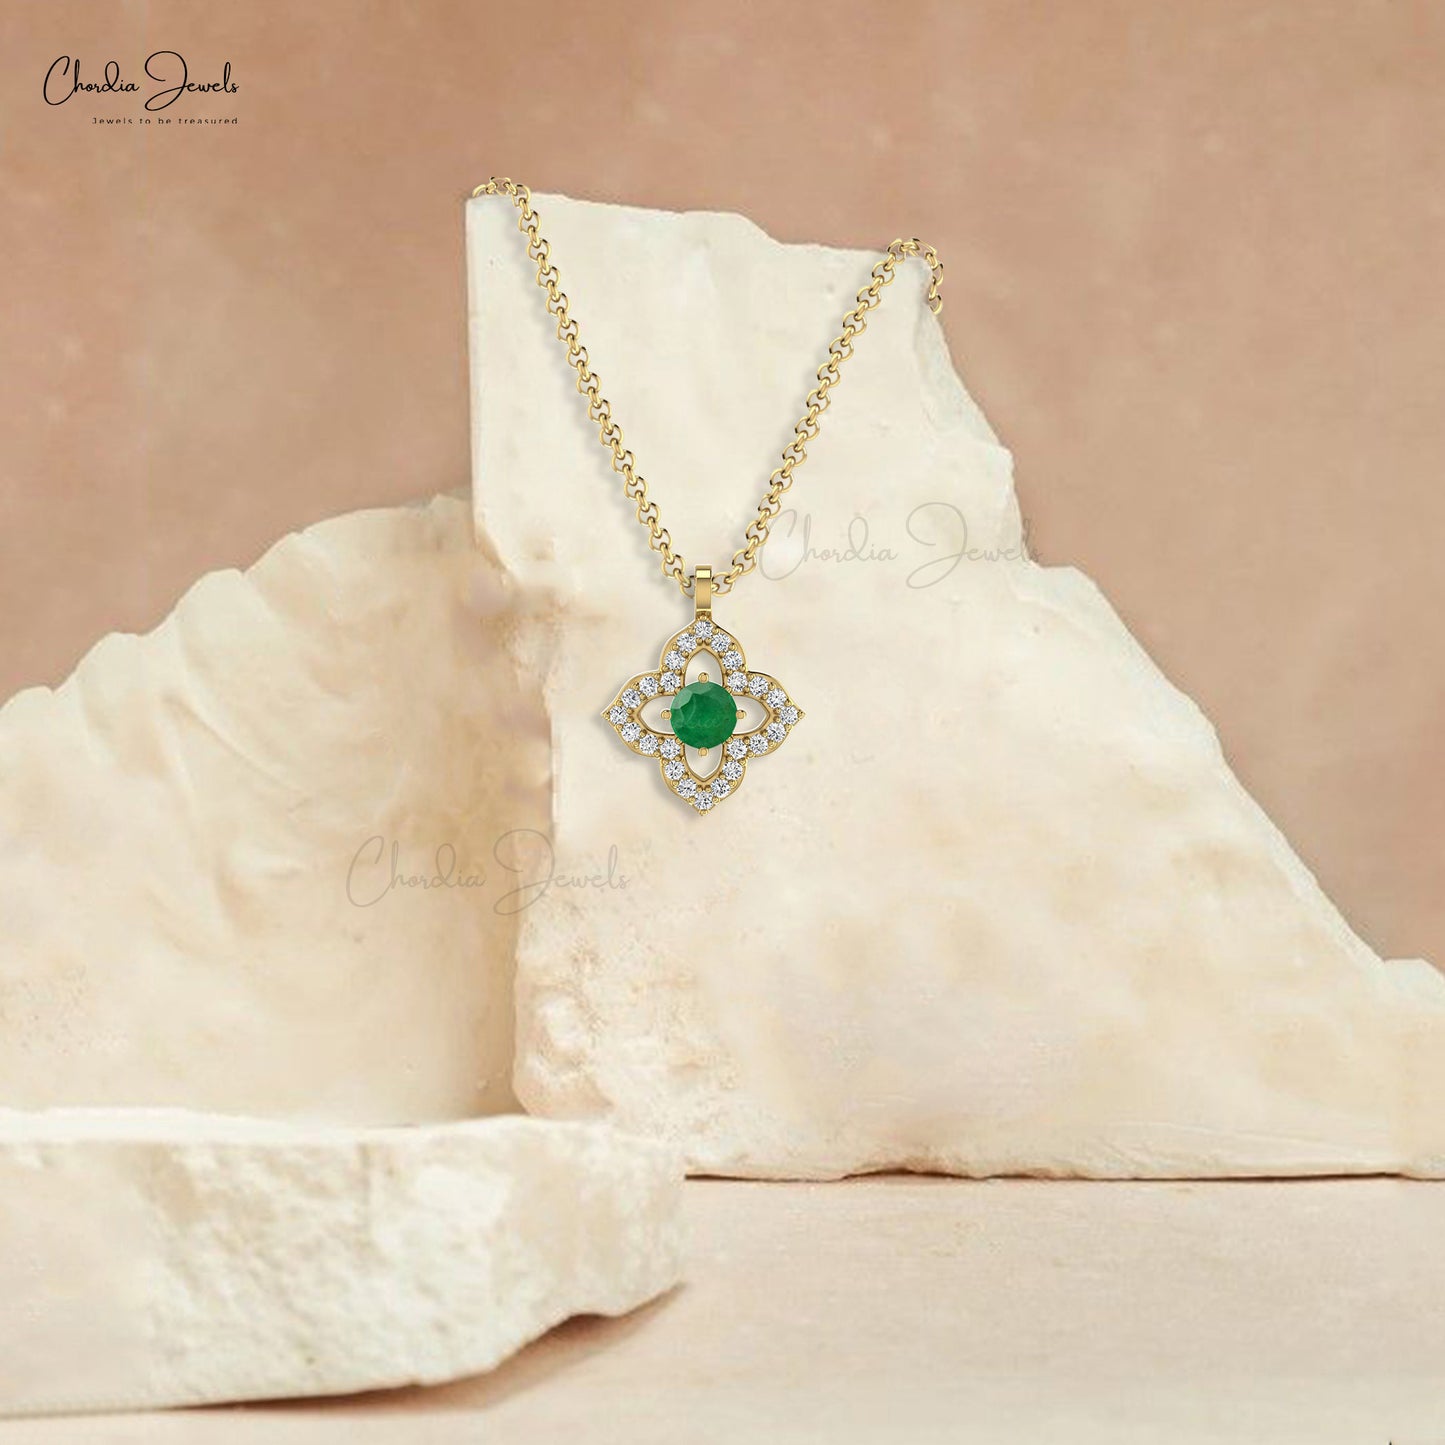 Floral Pendant With Natural Emerald Gemstone 14k Solid Gold Diamond Accents Unique Pendant